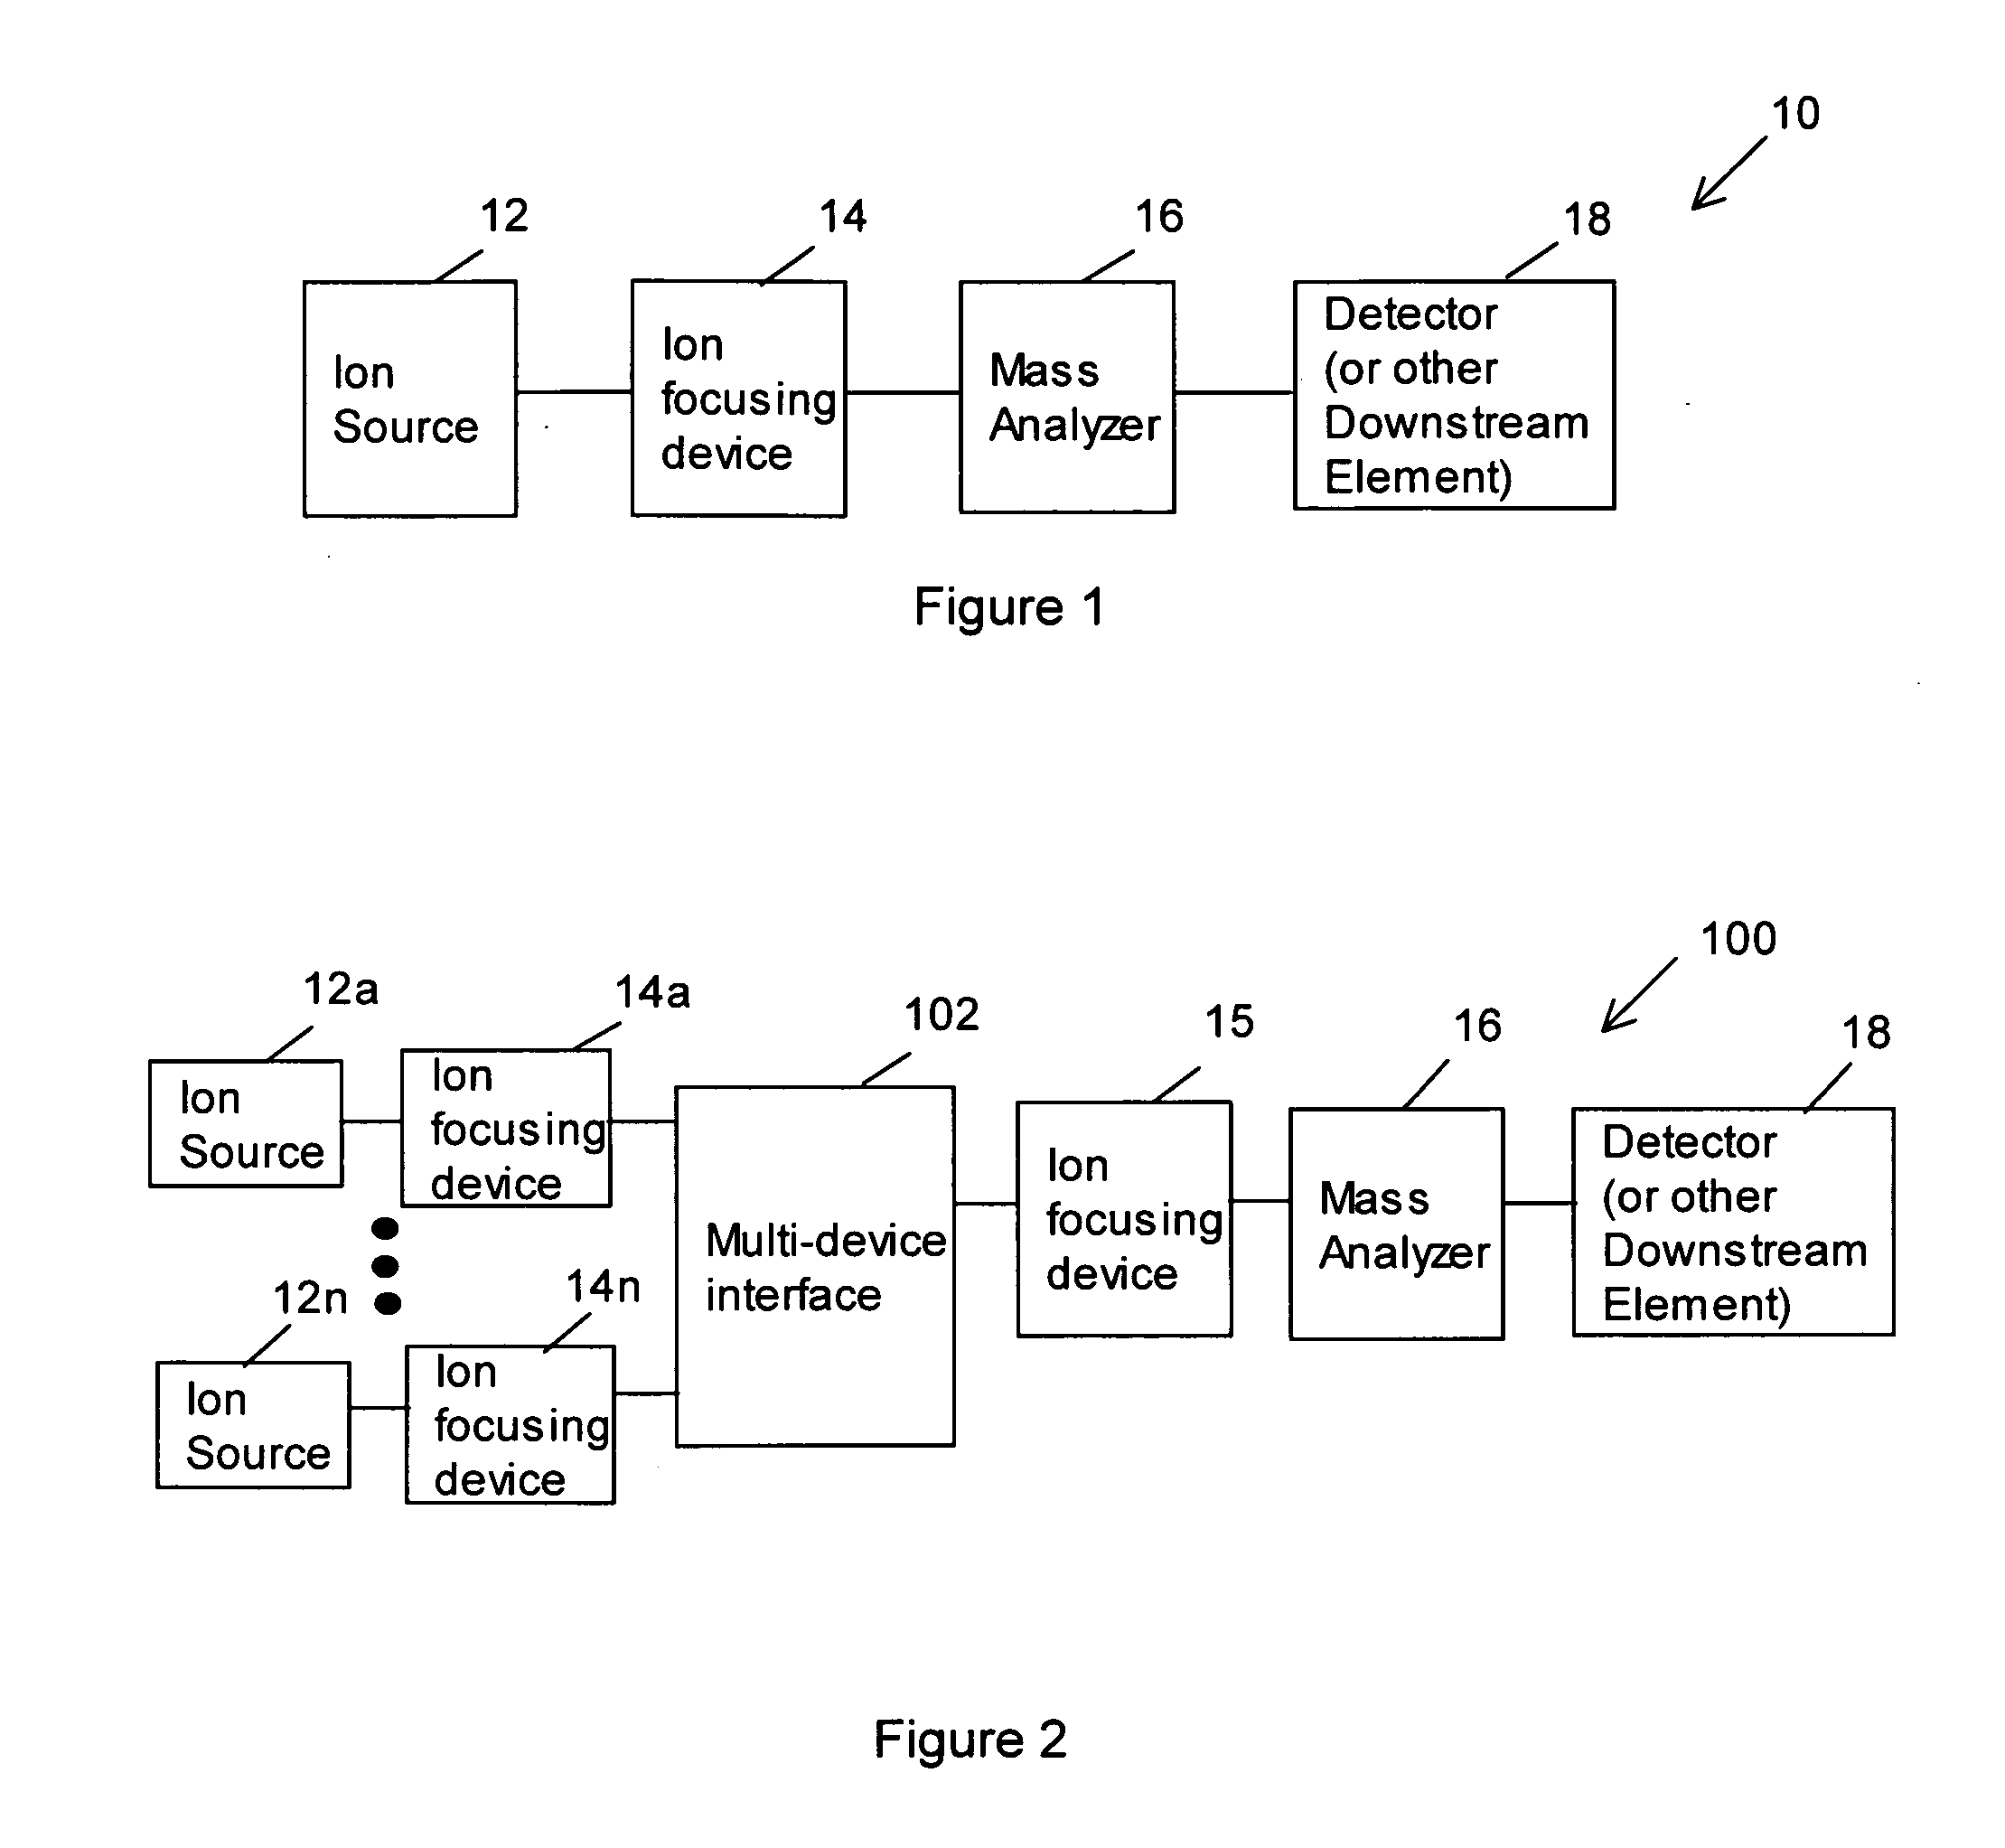 Mass spectrometer multiple device interface for parallel configuration of multiple devices